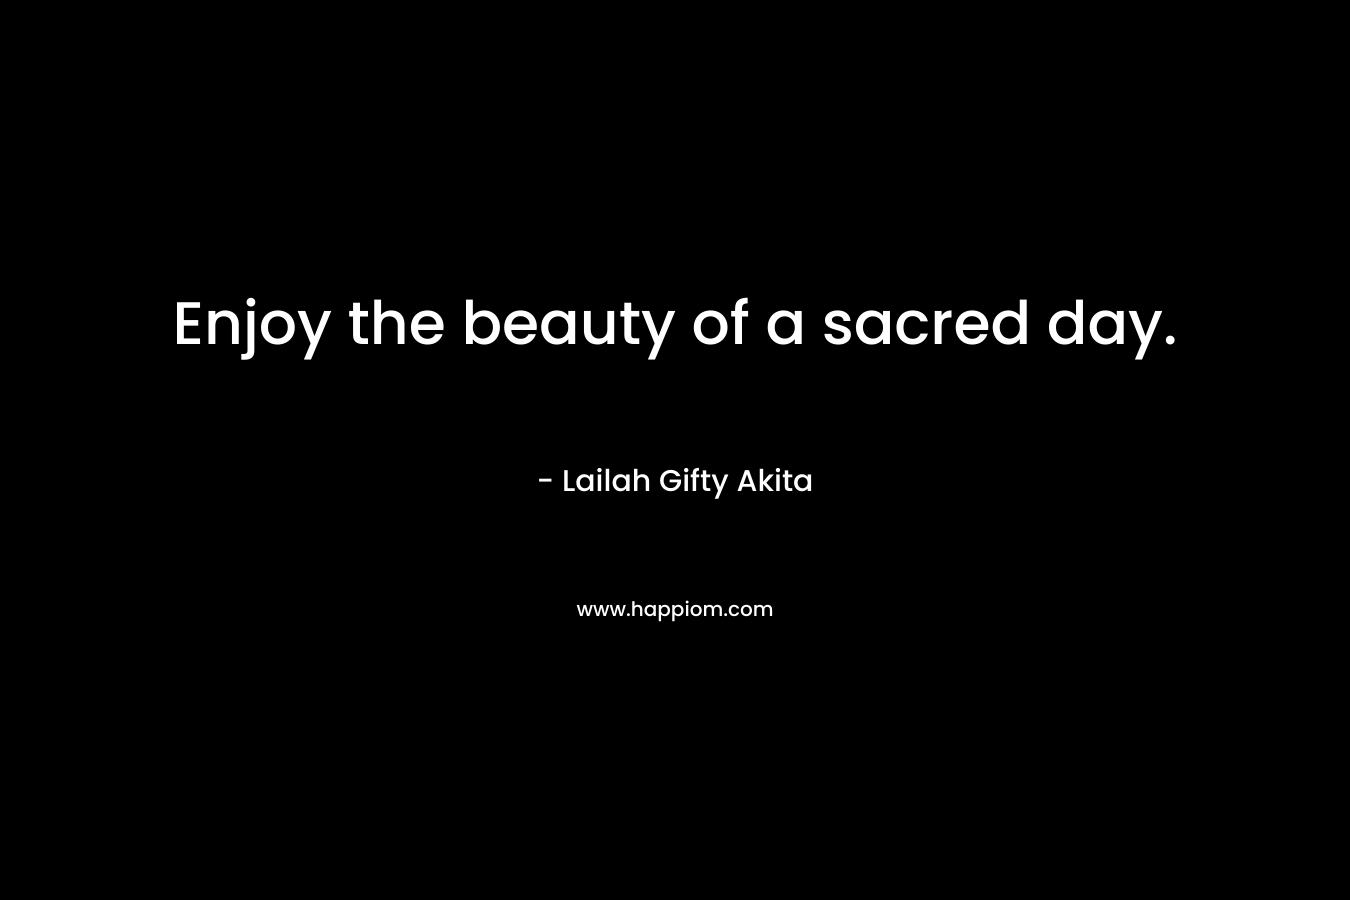 Enjoy the beauty of a sacred day.